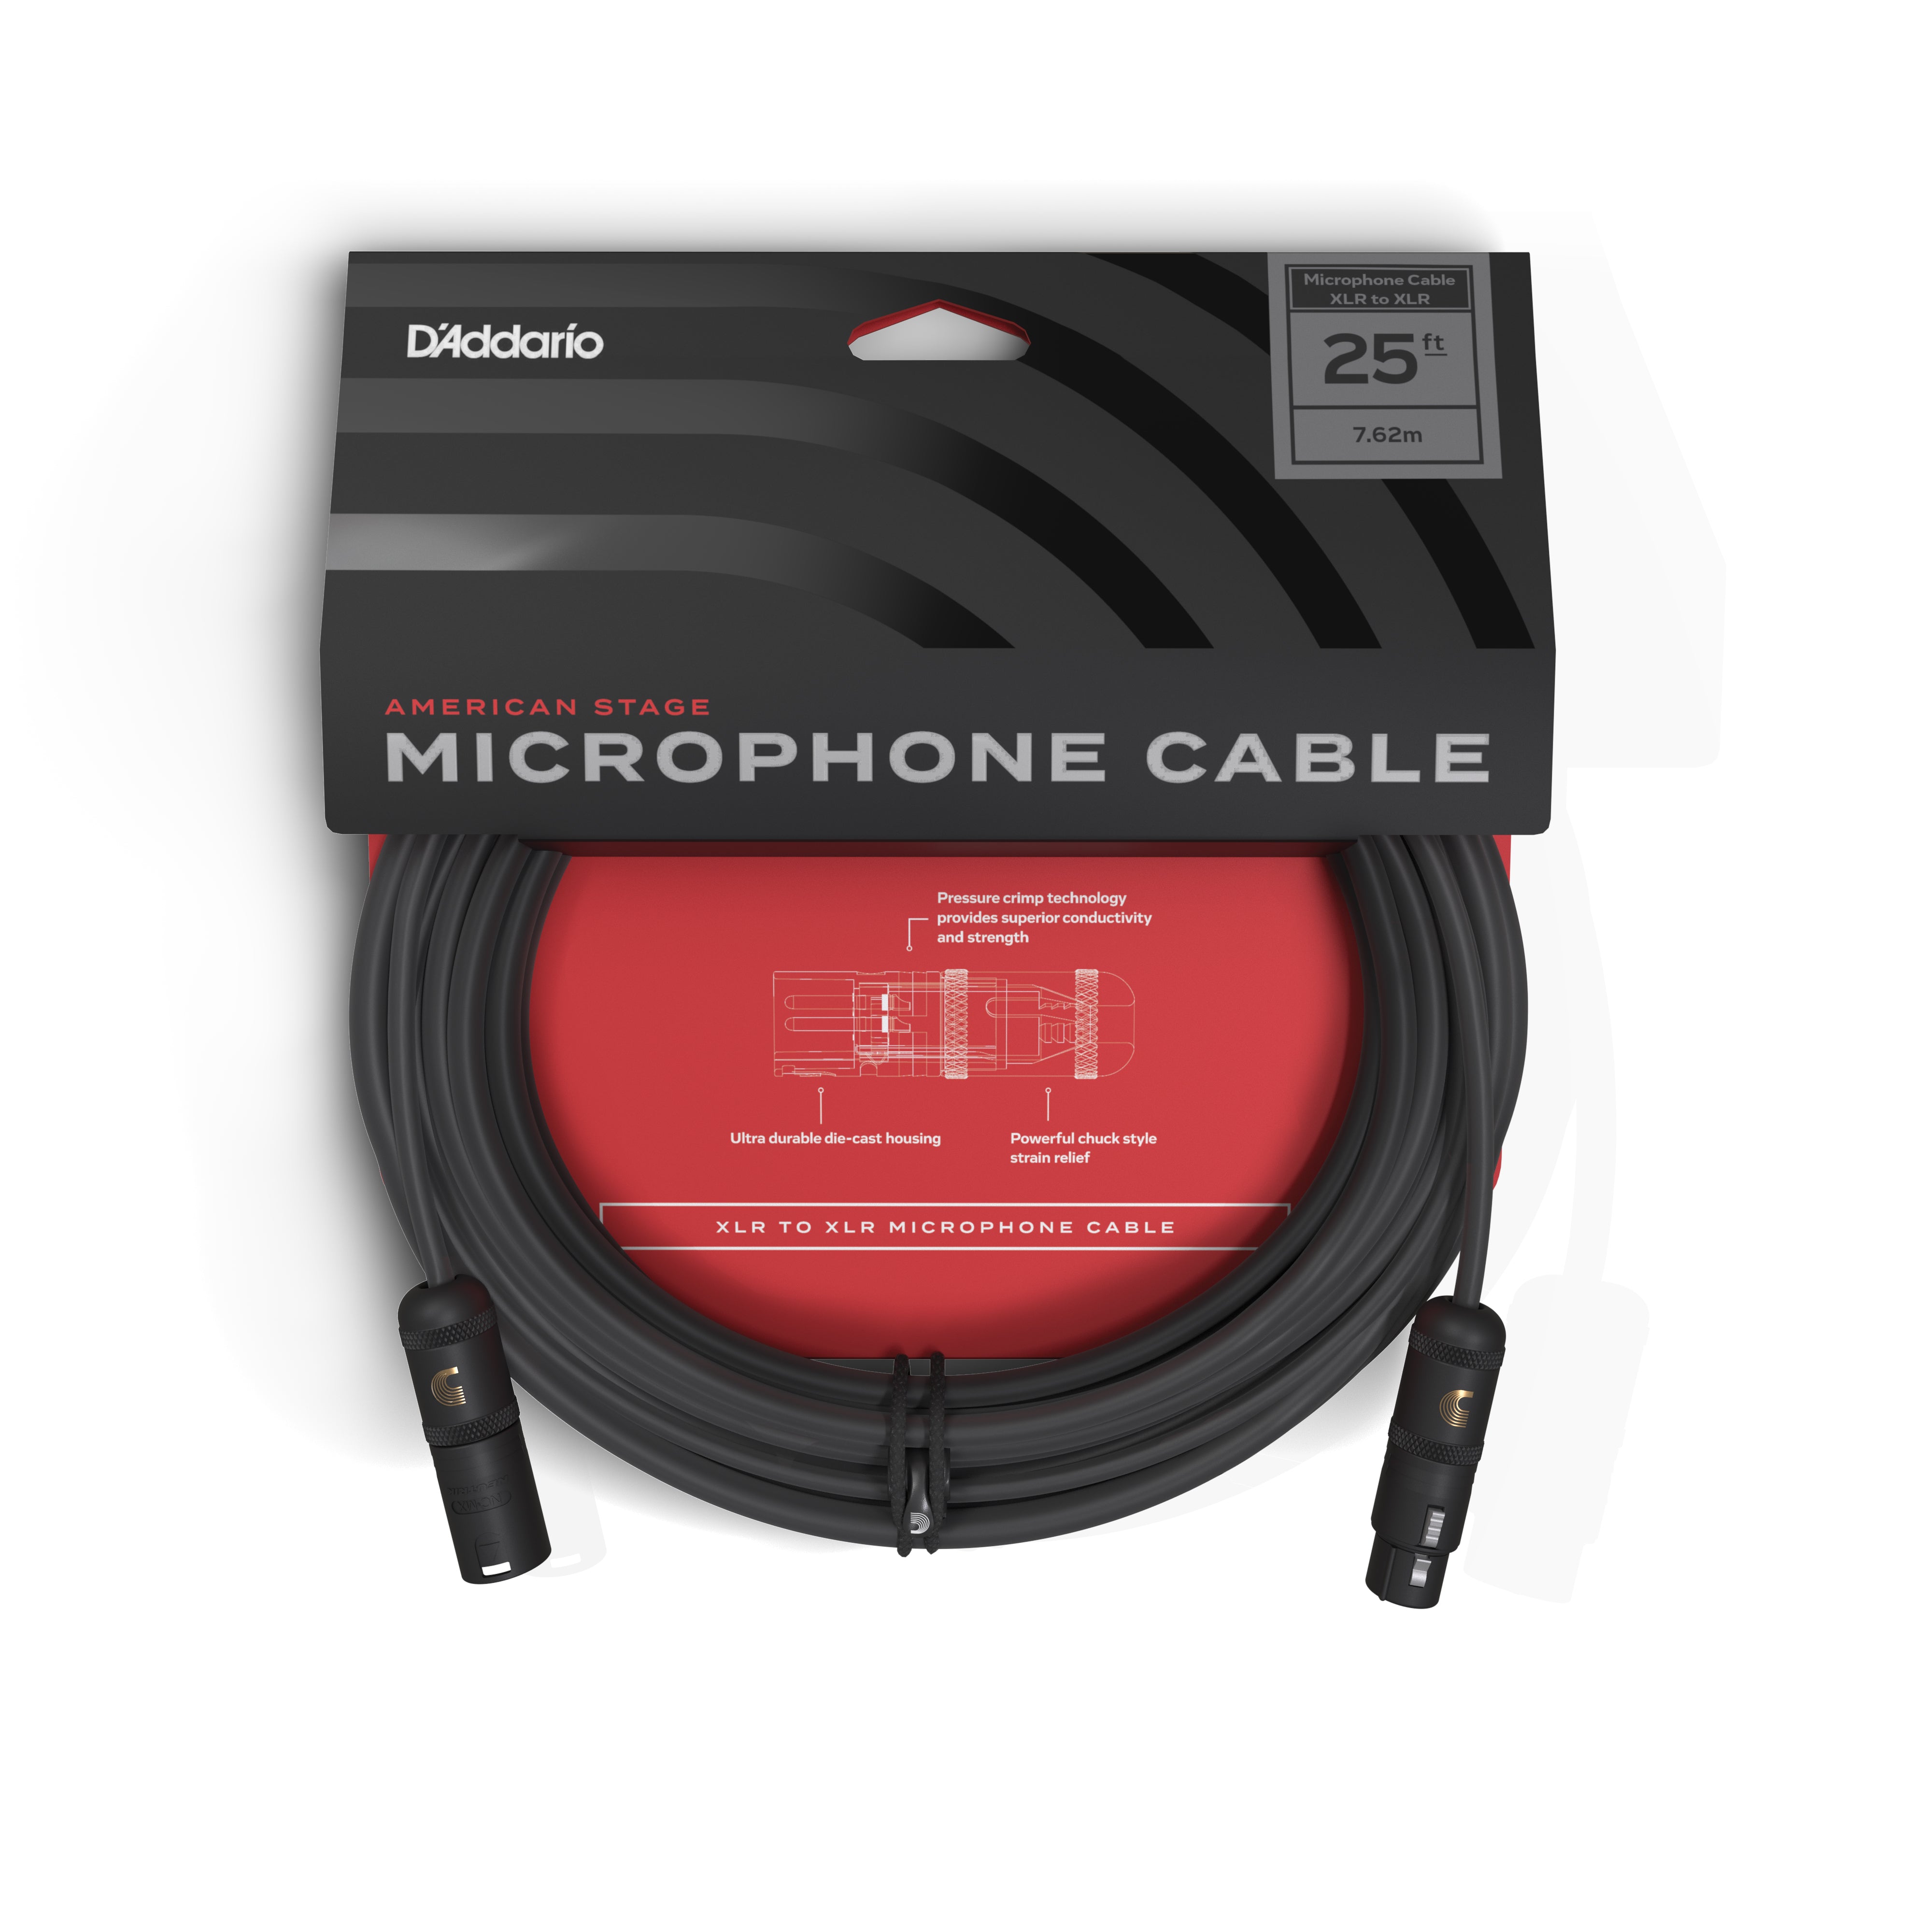 D'Addario American Stage 25ft Microphone Cable